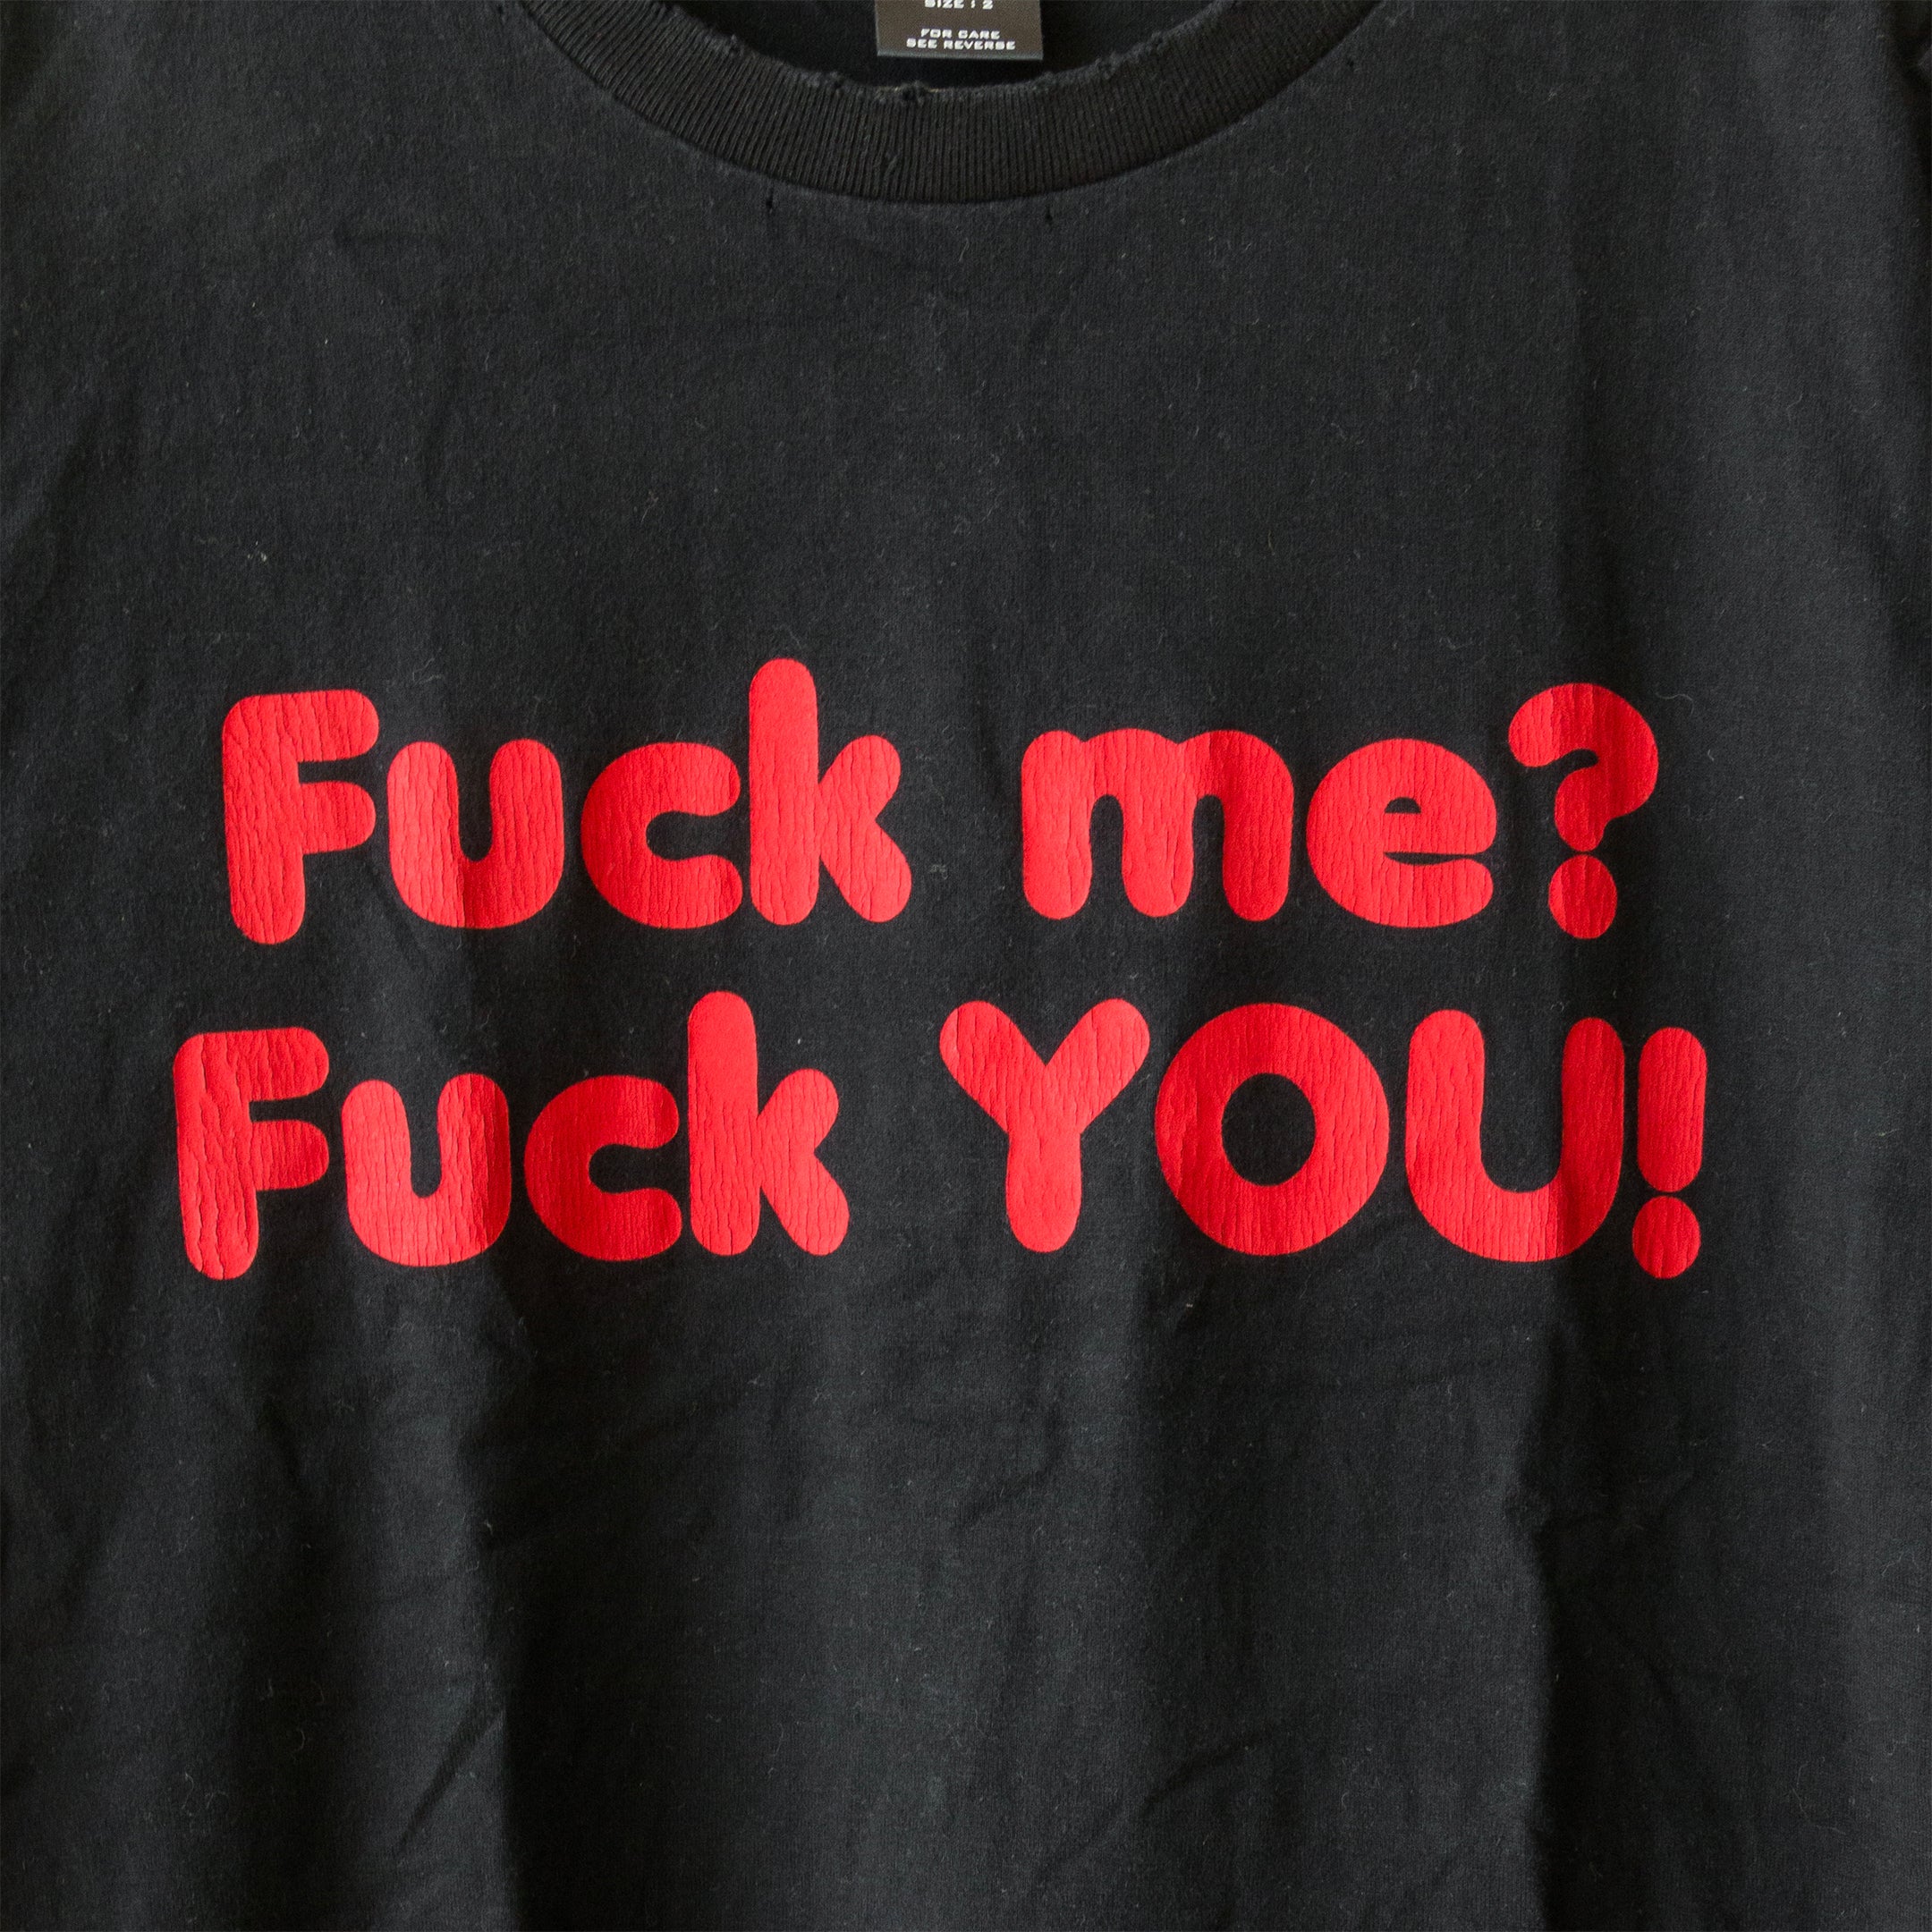 size 3 number (n)ine ガンズ期 Fuck you tee-